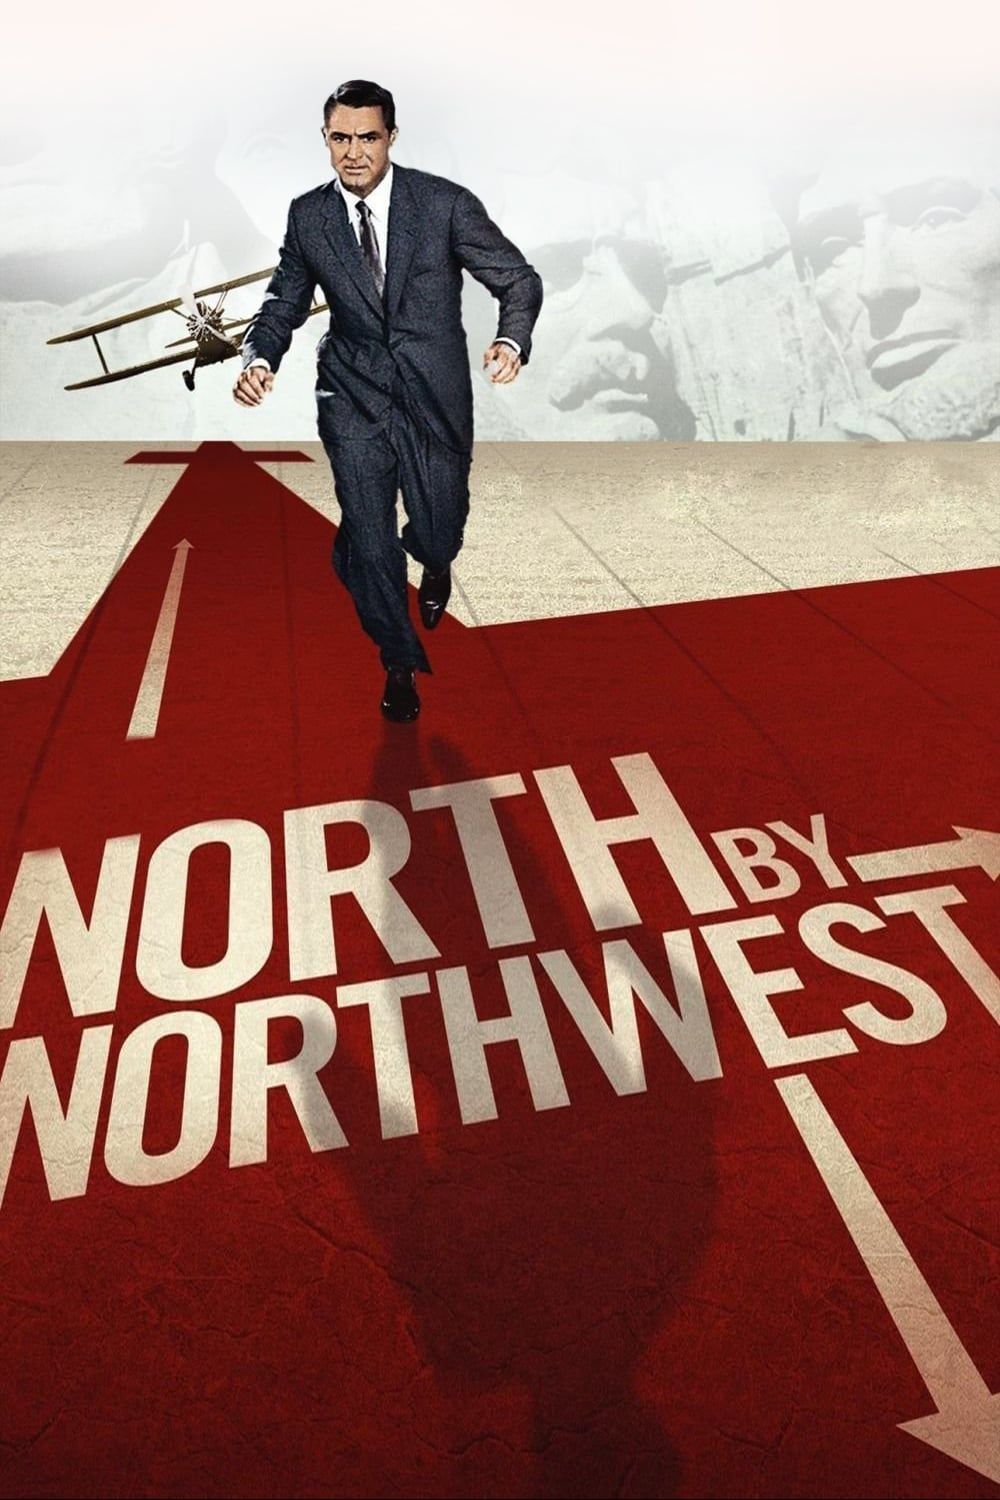 North by northwest tamil dubbed full